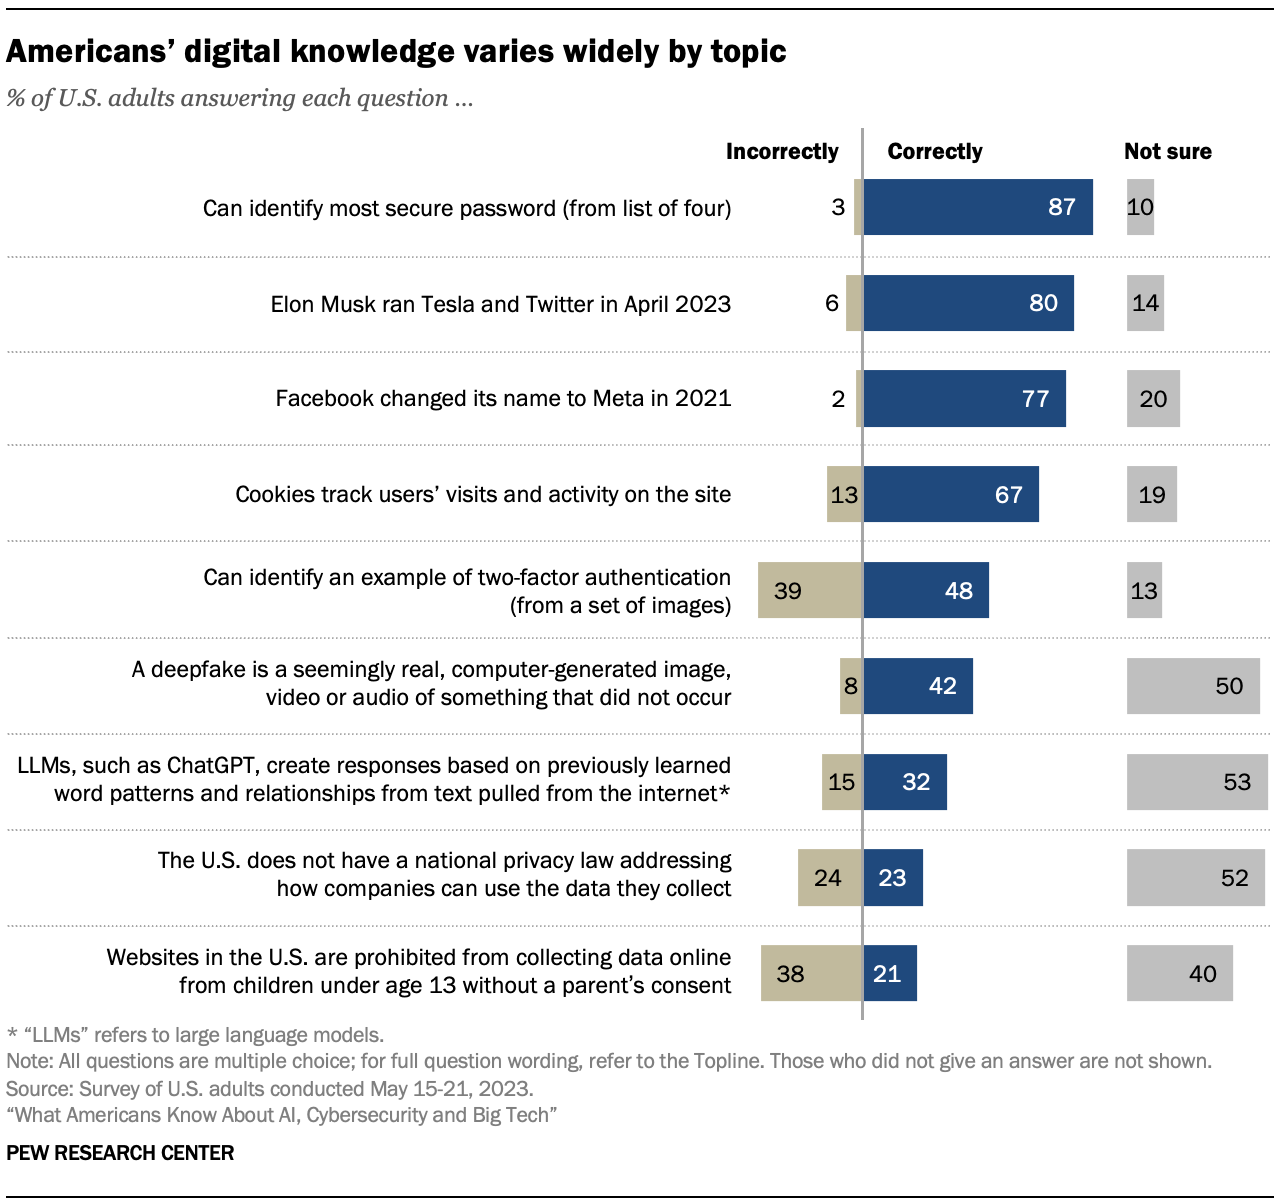 Americans’ digital knowledge varies widely by topic; 87% of U.S. adults can identify most secure password from a list of four but only 21% of U.S. adults know that website sin the U.S. are prohibited from collecting data online from children under age 13 without a parents' consent